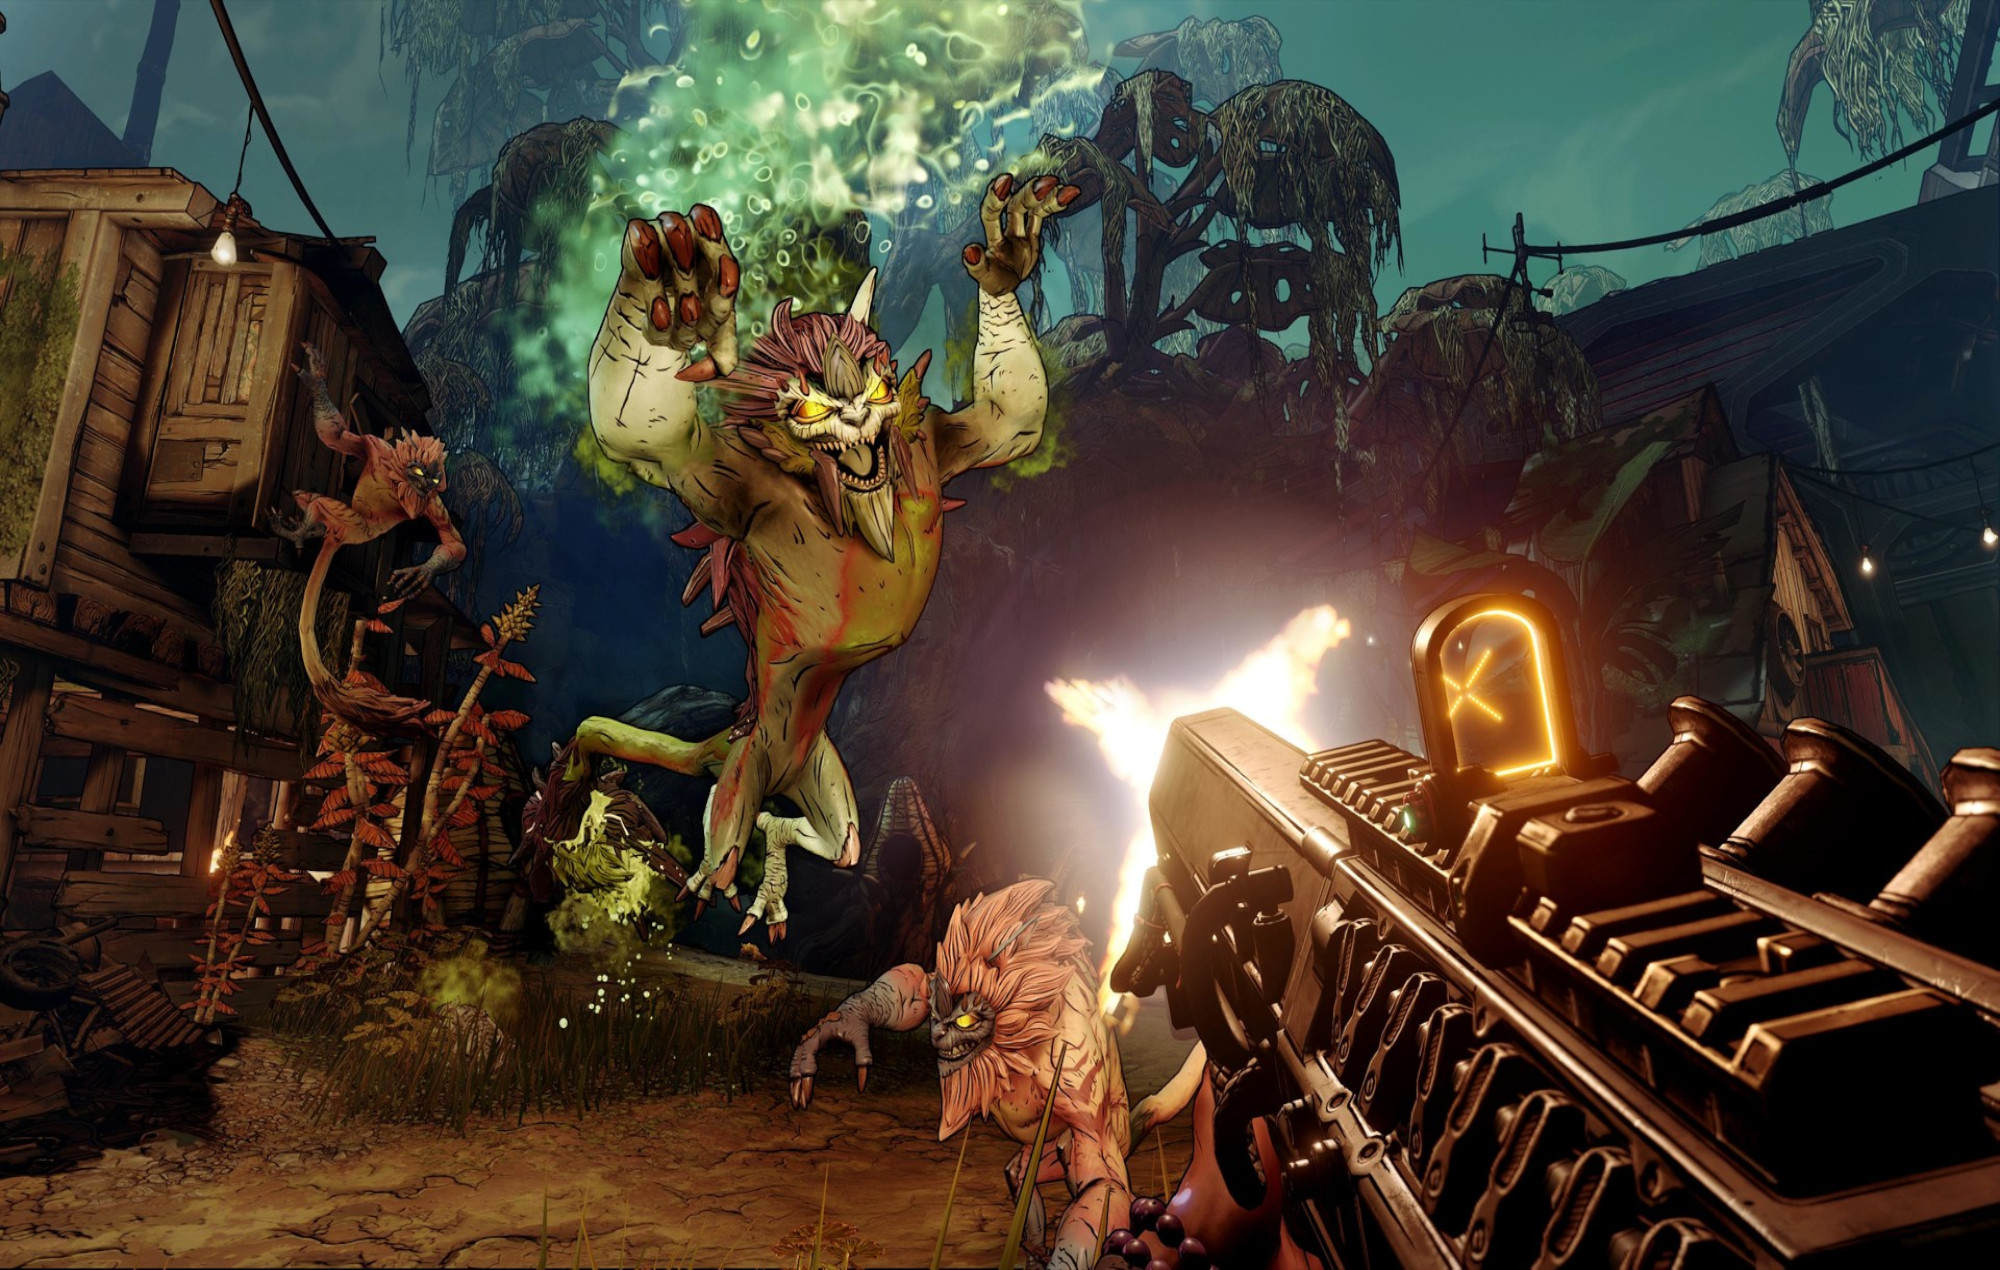 ‘Borderlands 3’ is coming to PlayStation Plus next month